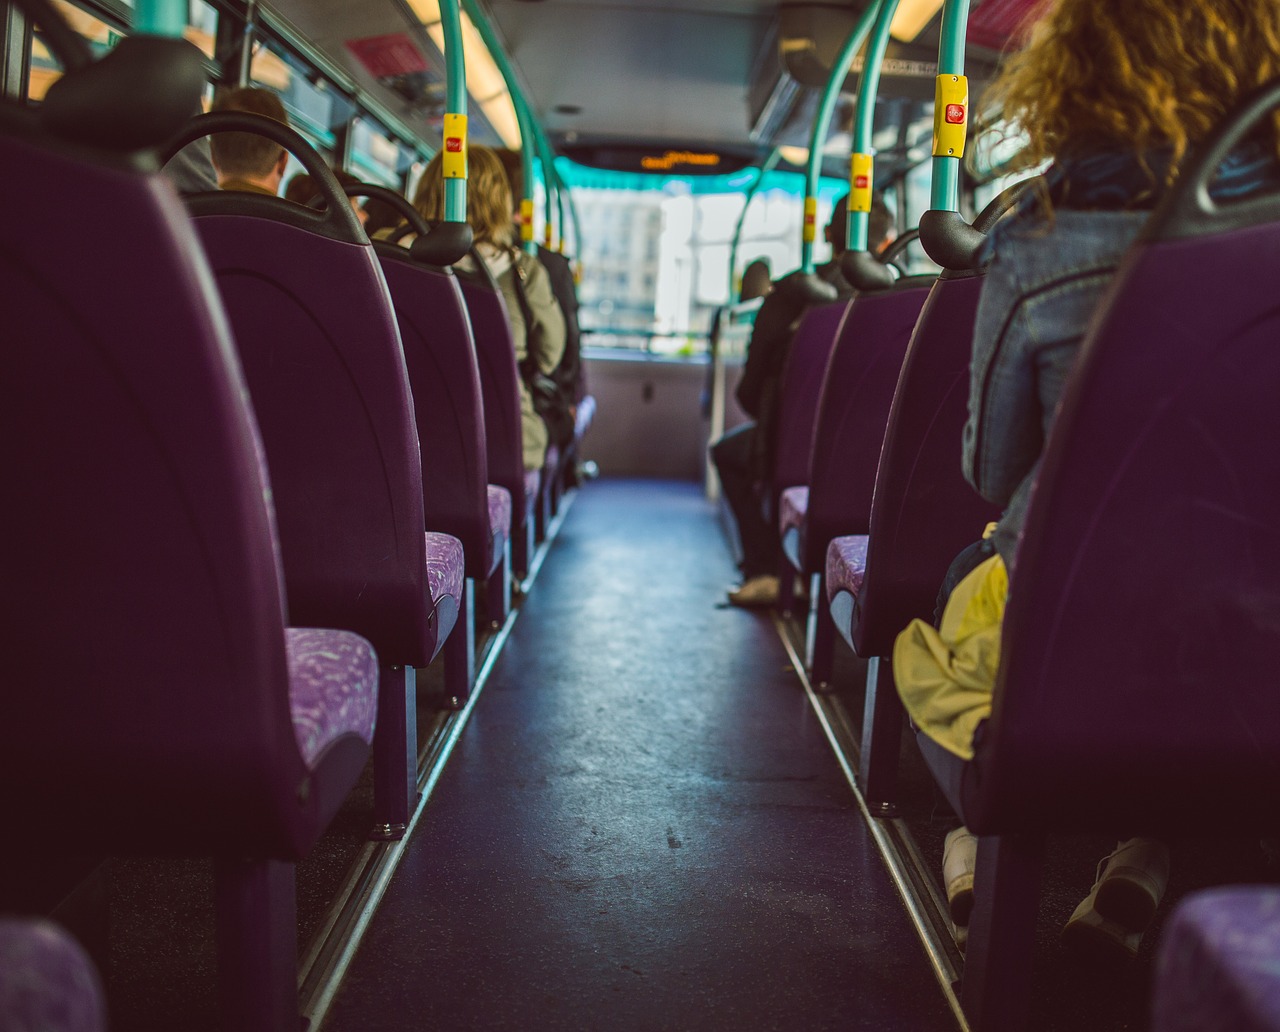 Bus travel in Bradford: An autistic person’s guide